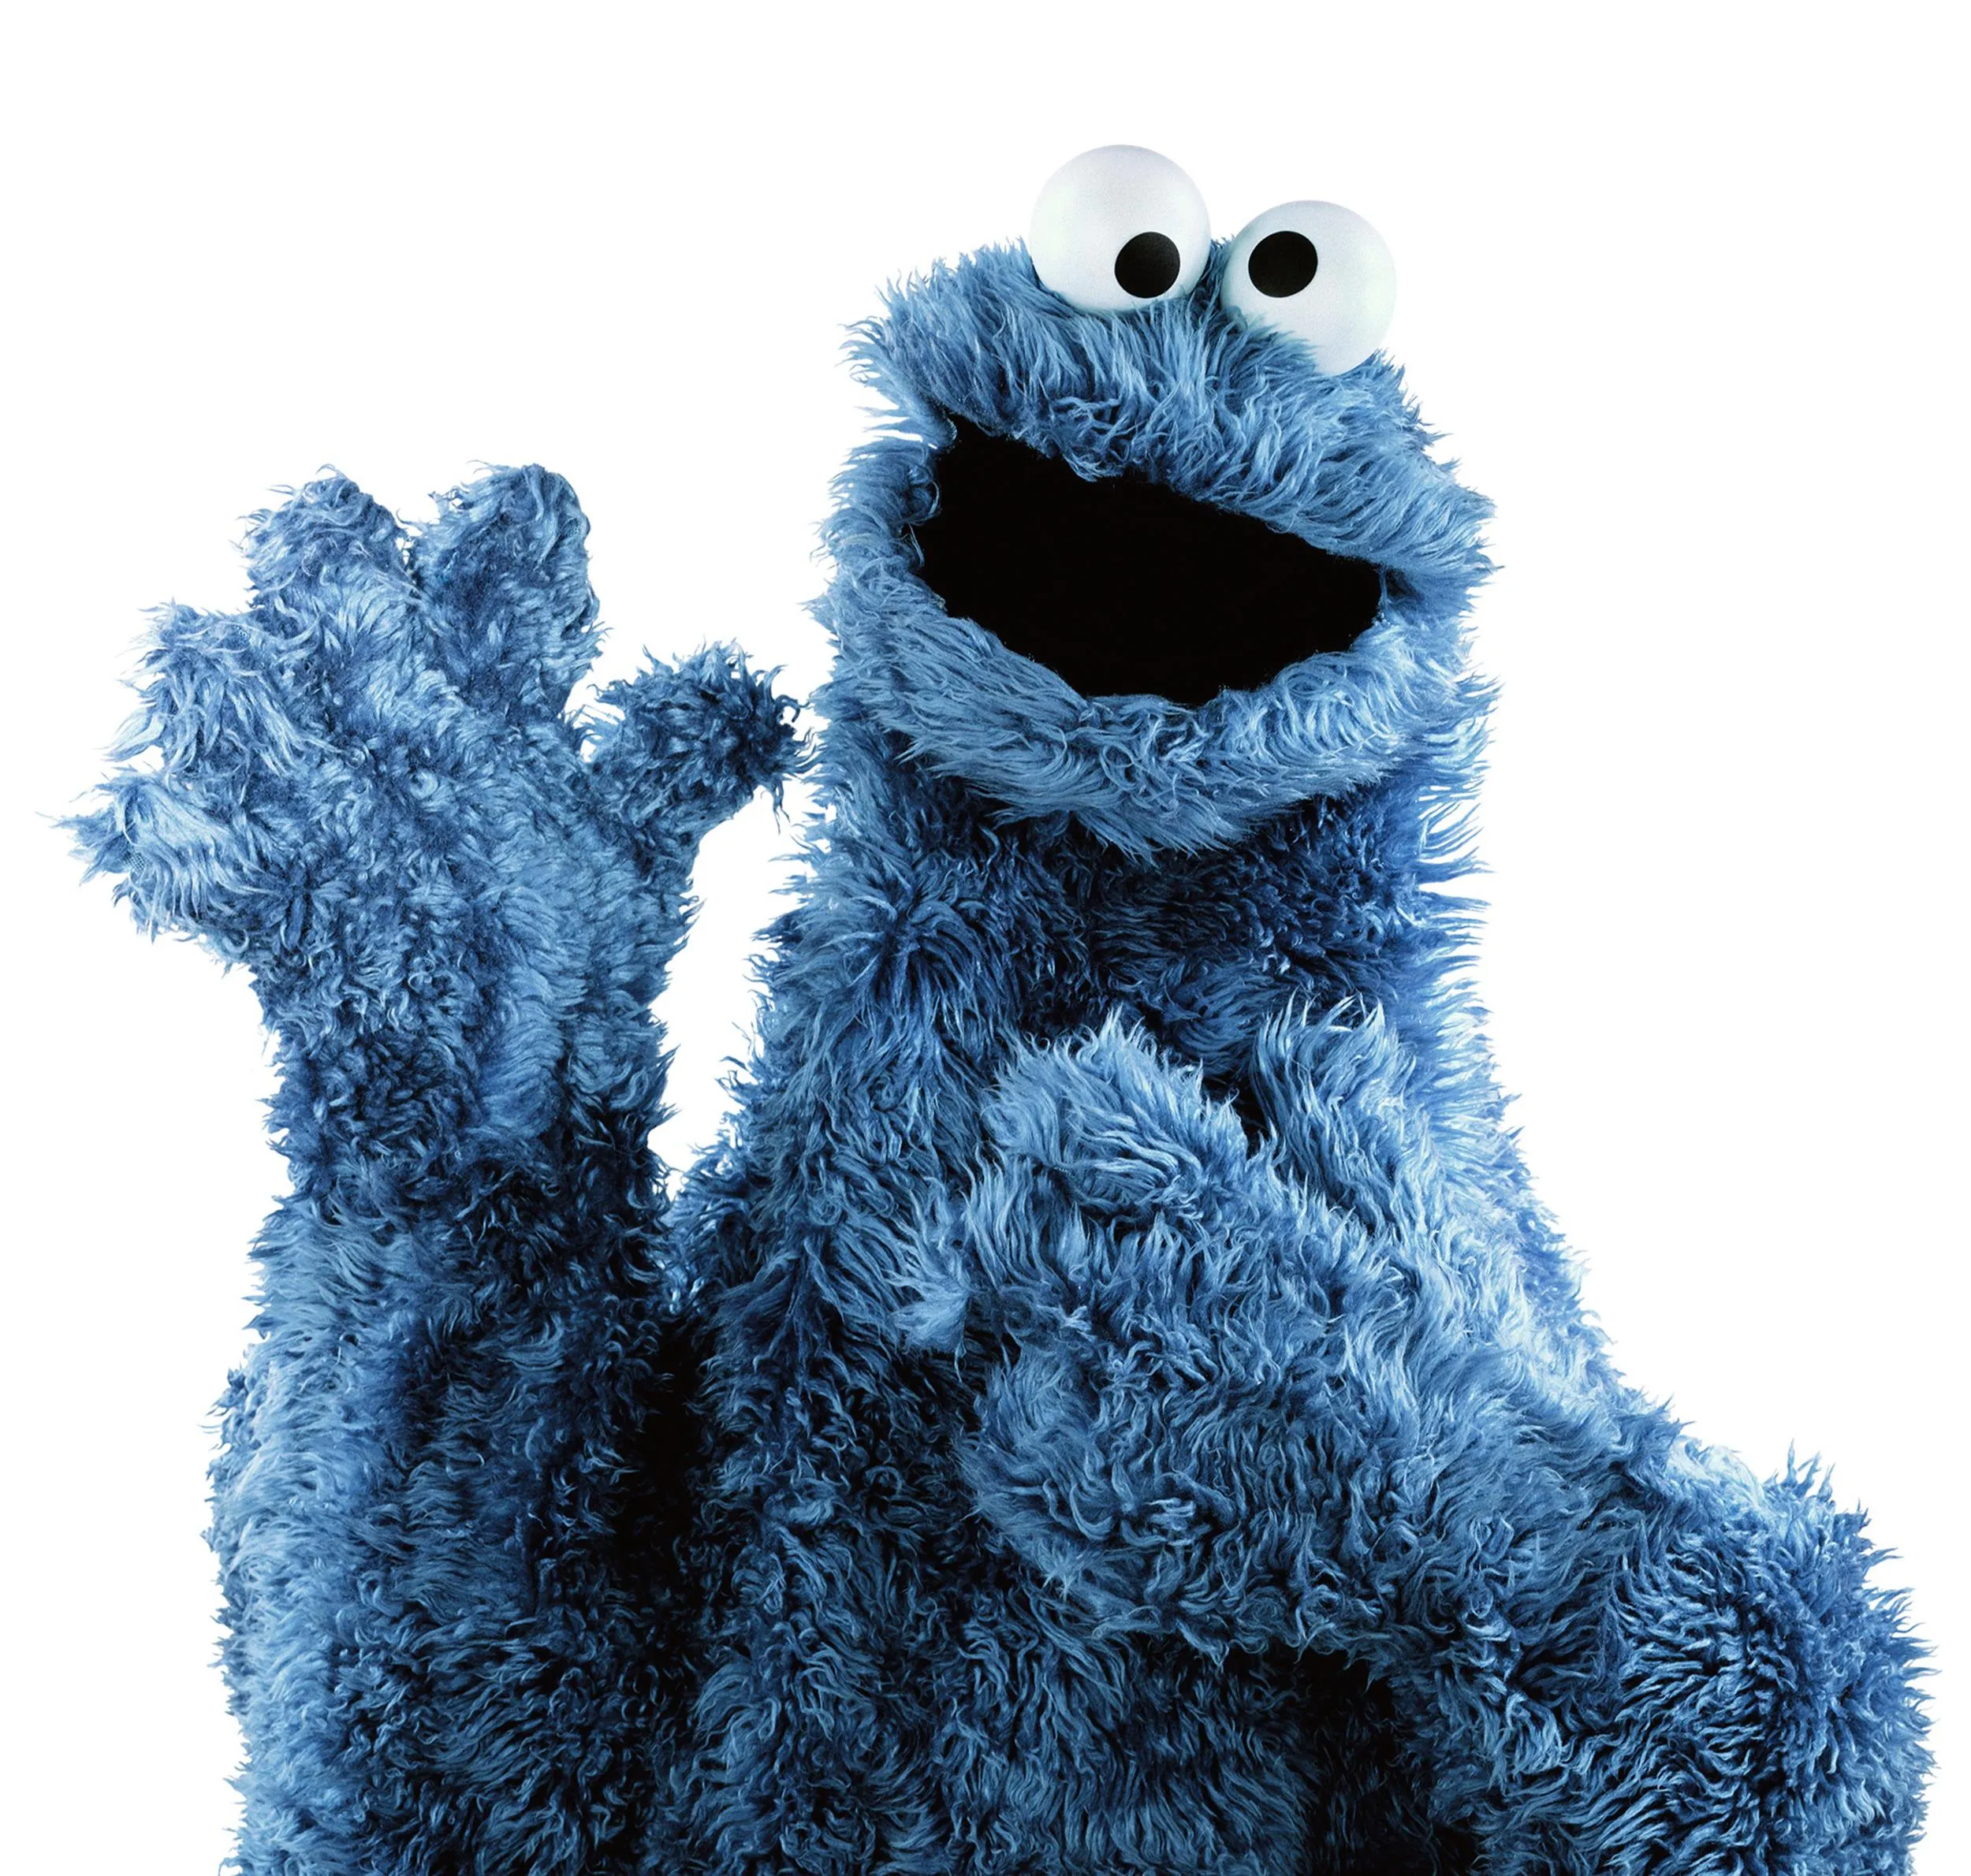 Cookie Monster Corrupted by Neo-Nazis to Lure Kids - NBC News